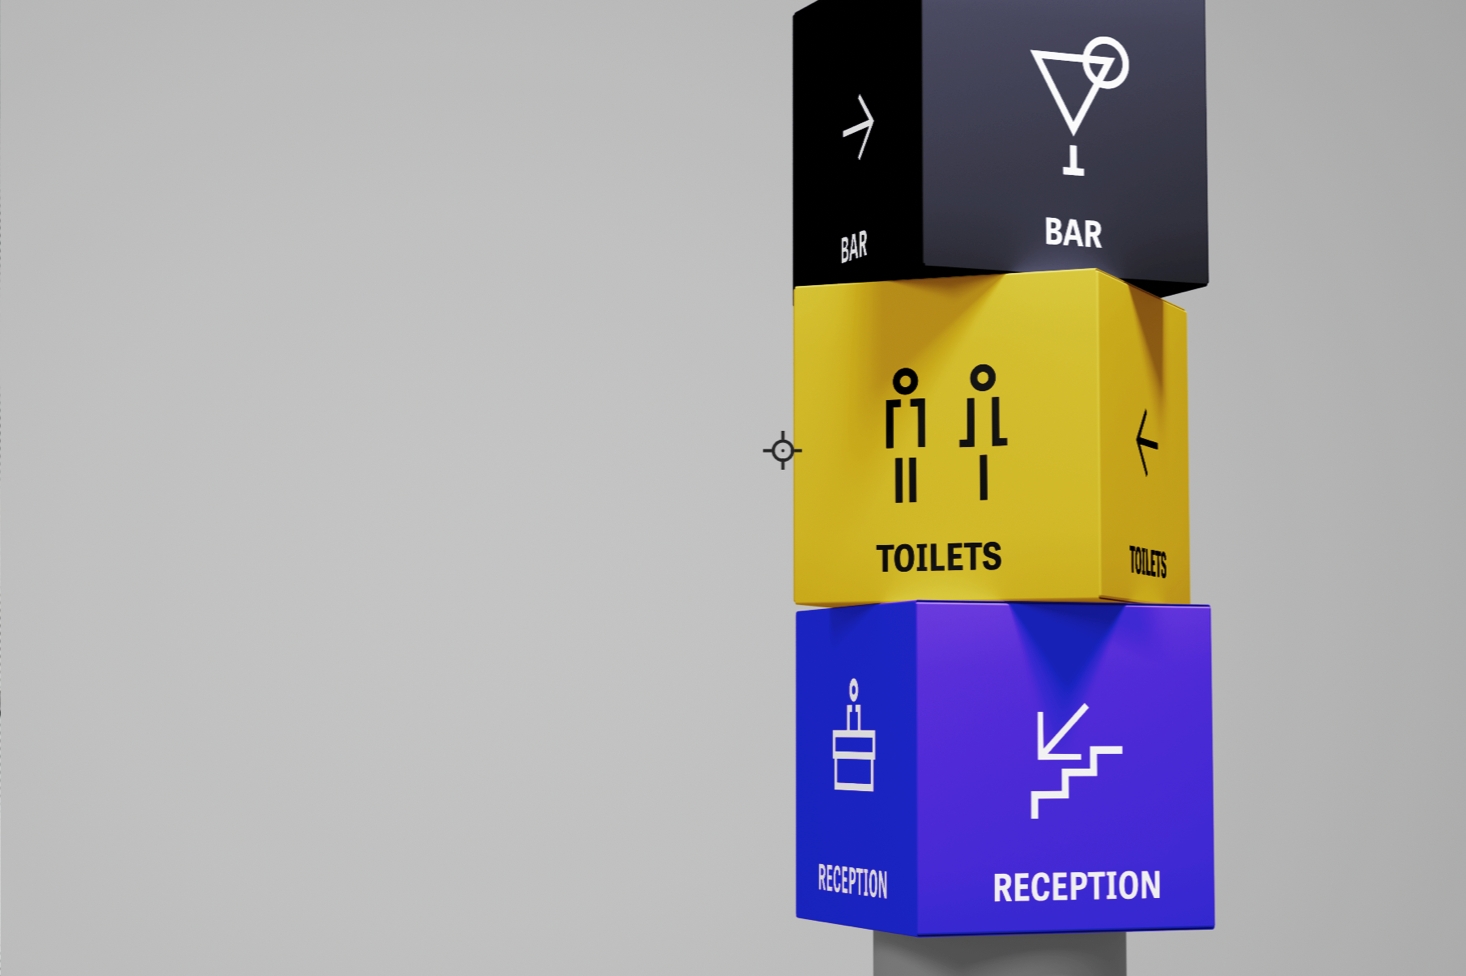 Three directional cubes direct people to the bar toilets and reception and visual icons depict these areas